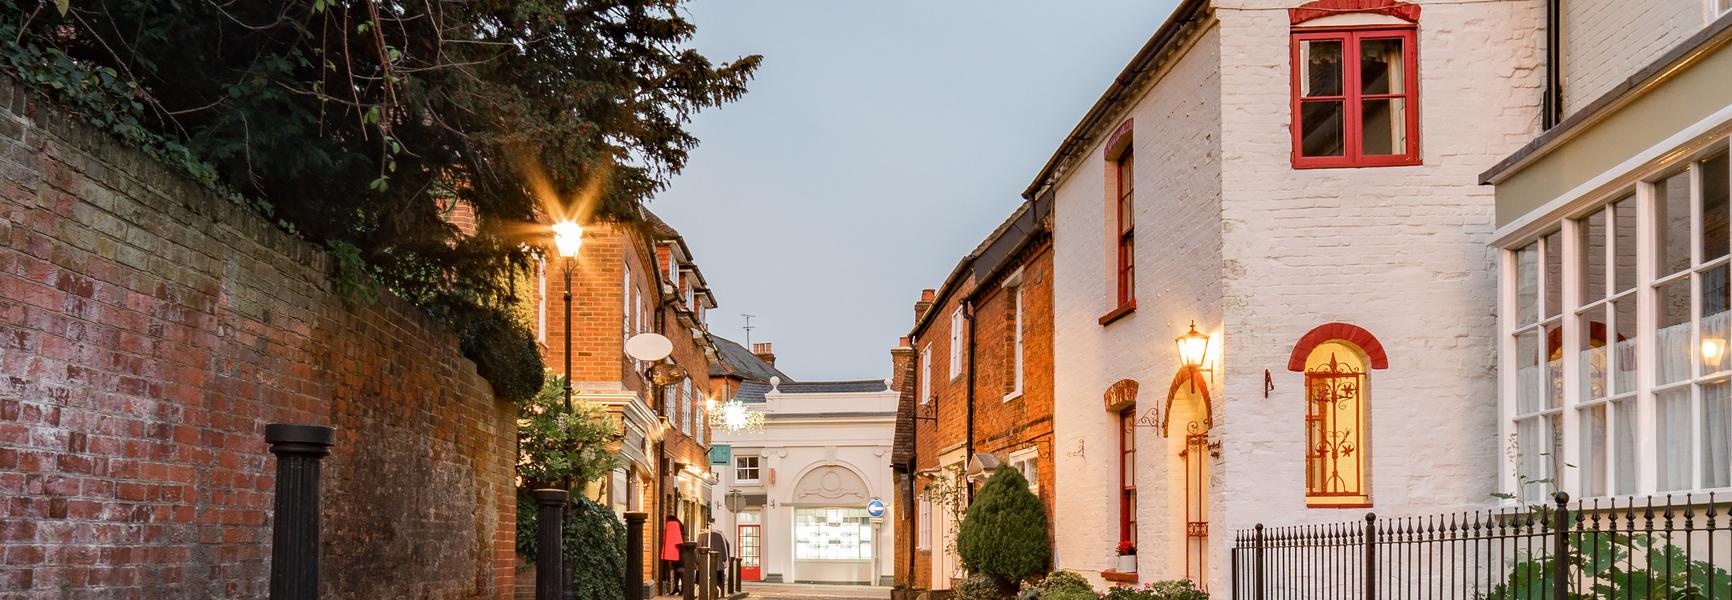 Holiday lettings & accommodation in Reigate - HomeToGo